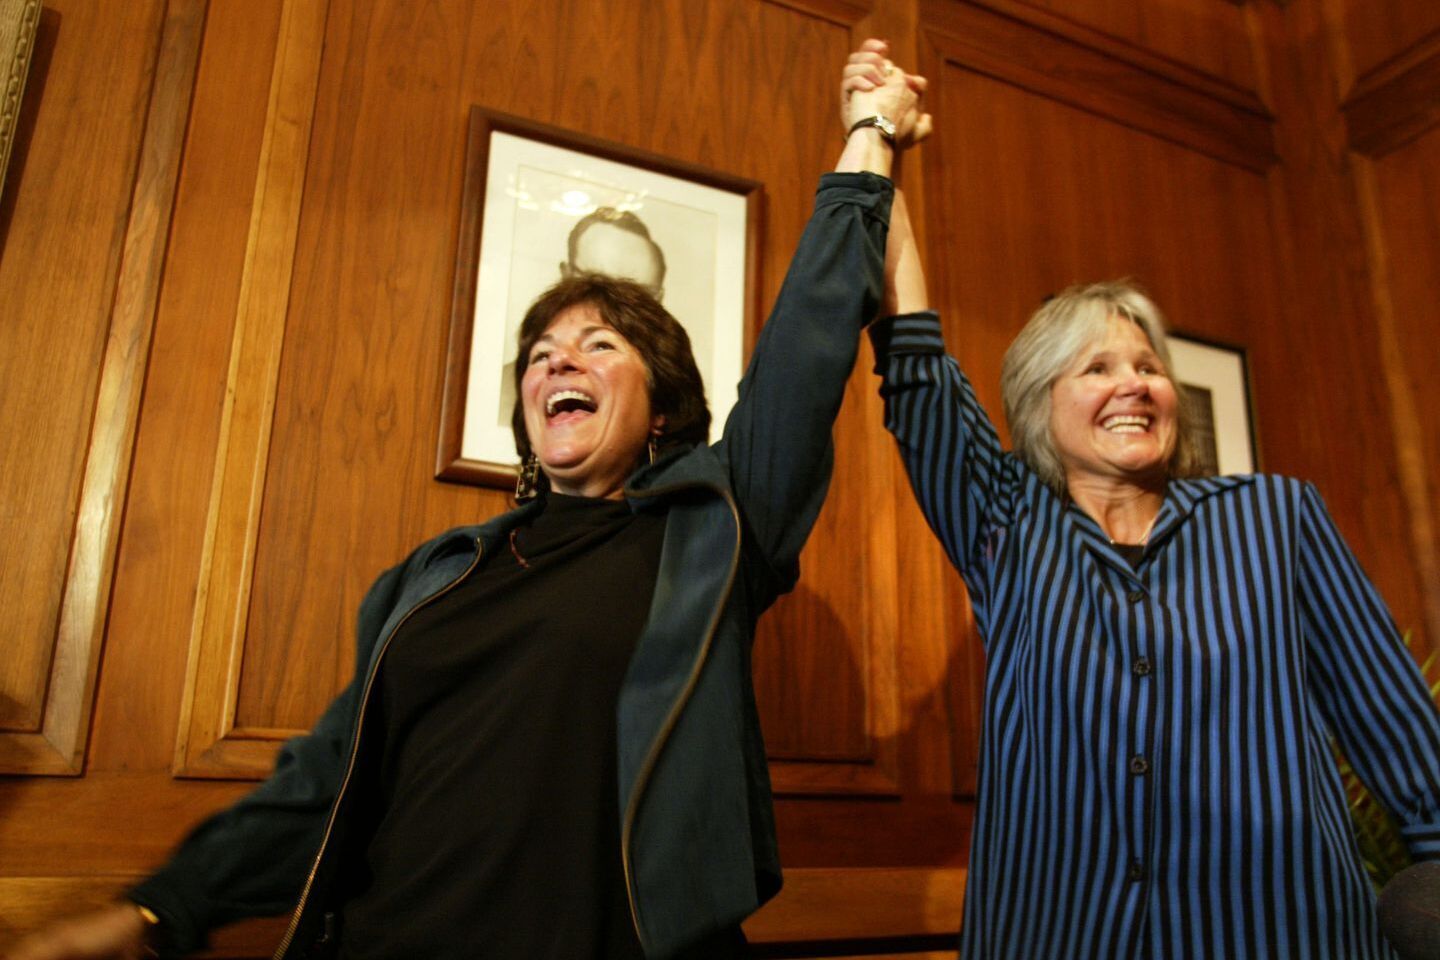 Most Influential Women in History Weddings: Tanya McCloskey and Marcia Kadish holding their clasped hands in the air just moments after saying I-DO